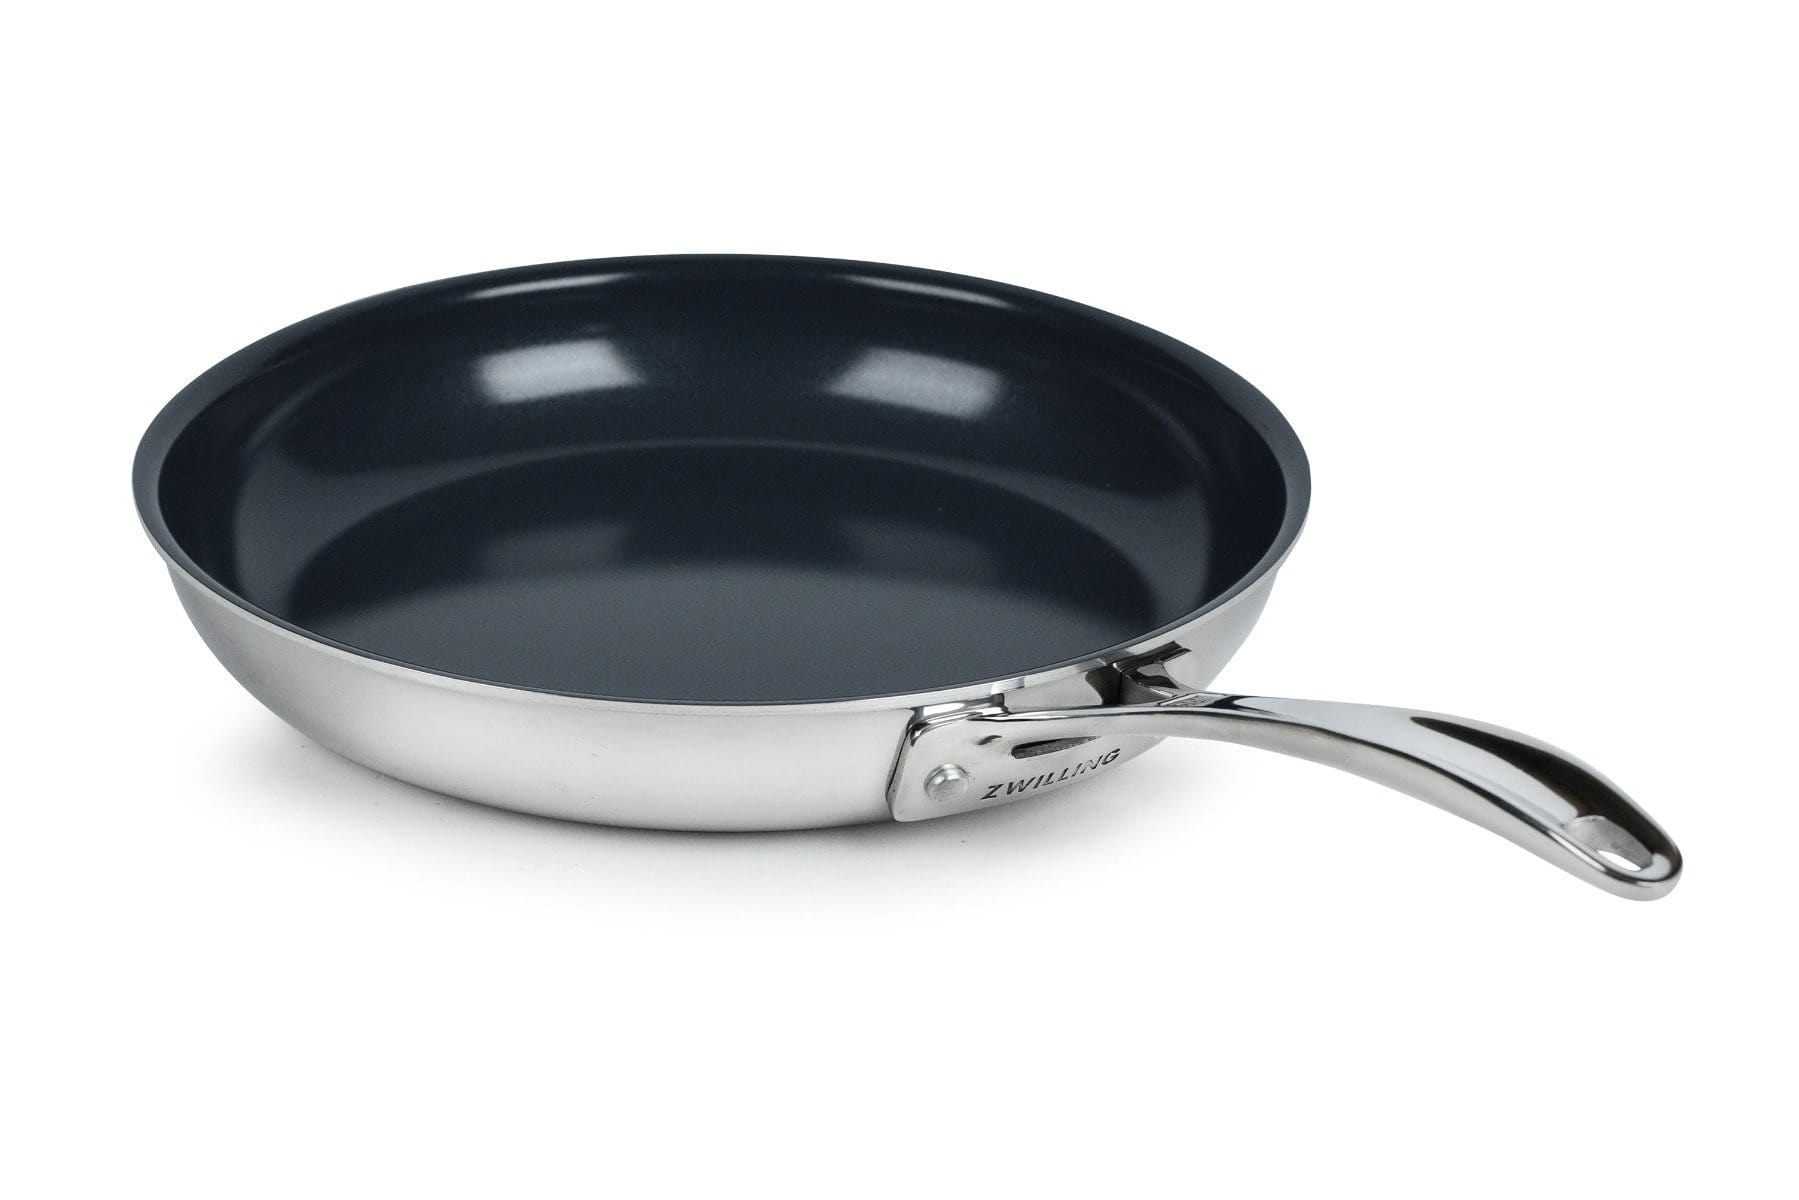 Zwilling Fry Pan Zwilling Clad CFX 10" Stainless Steel Ceramic Non-Stick Fry Pan